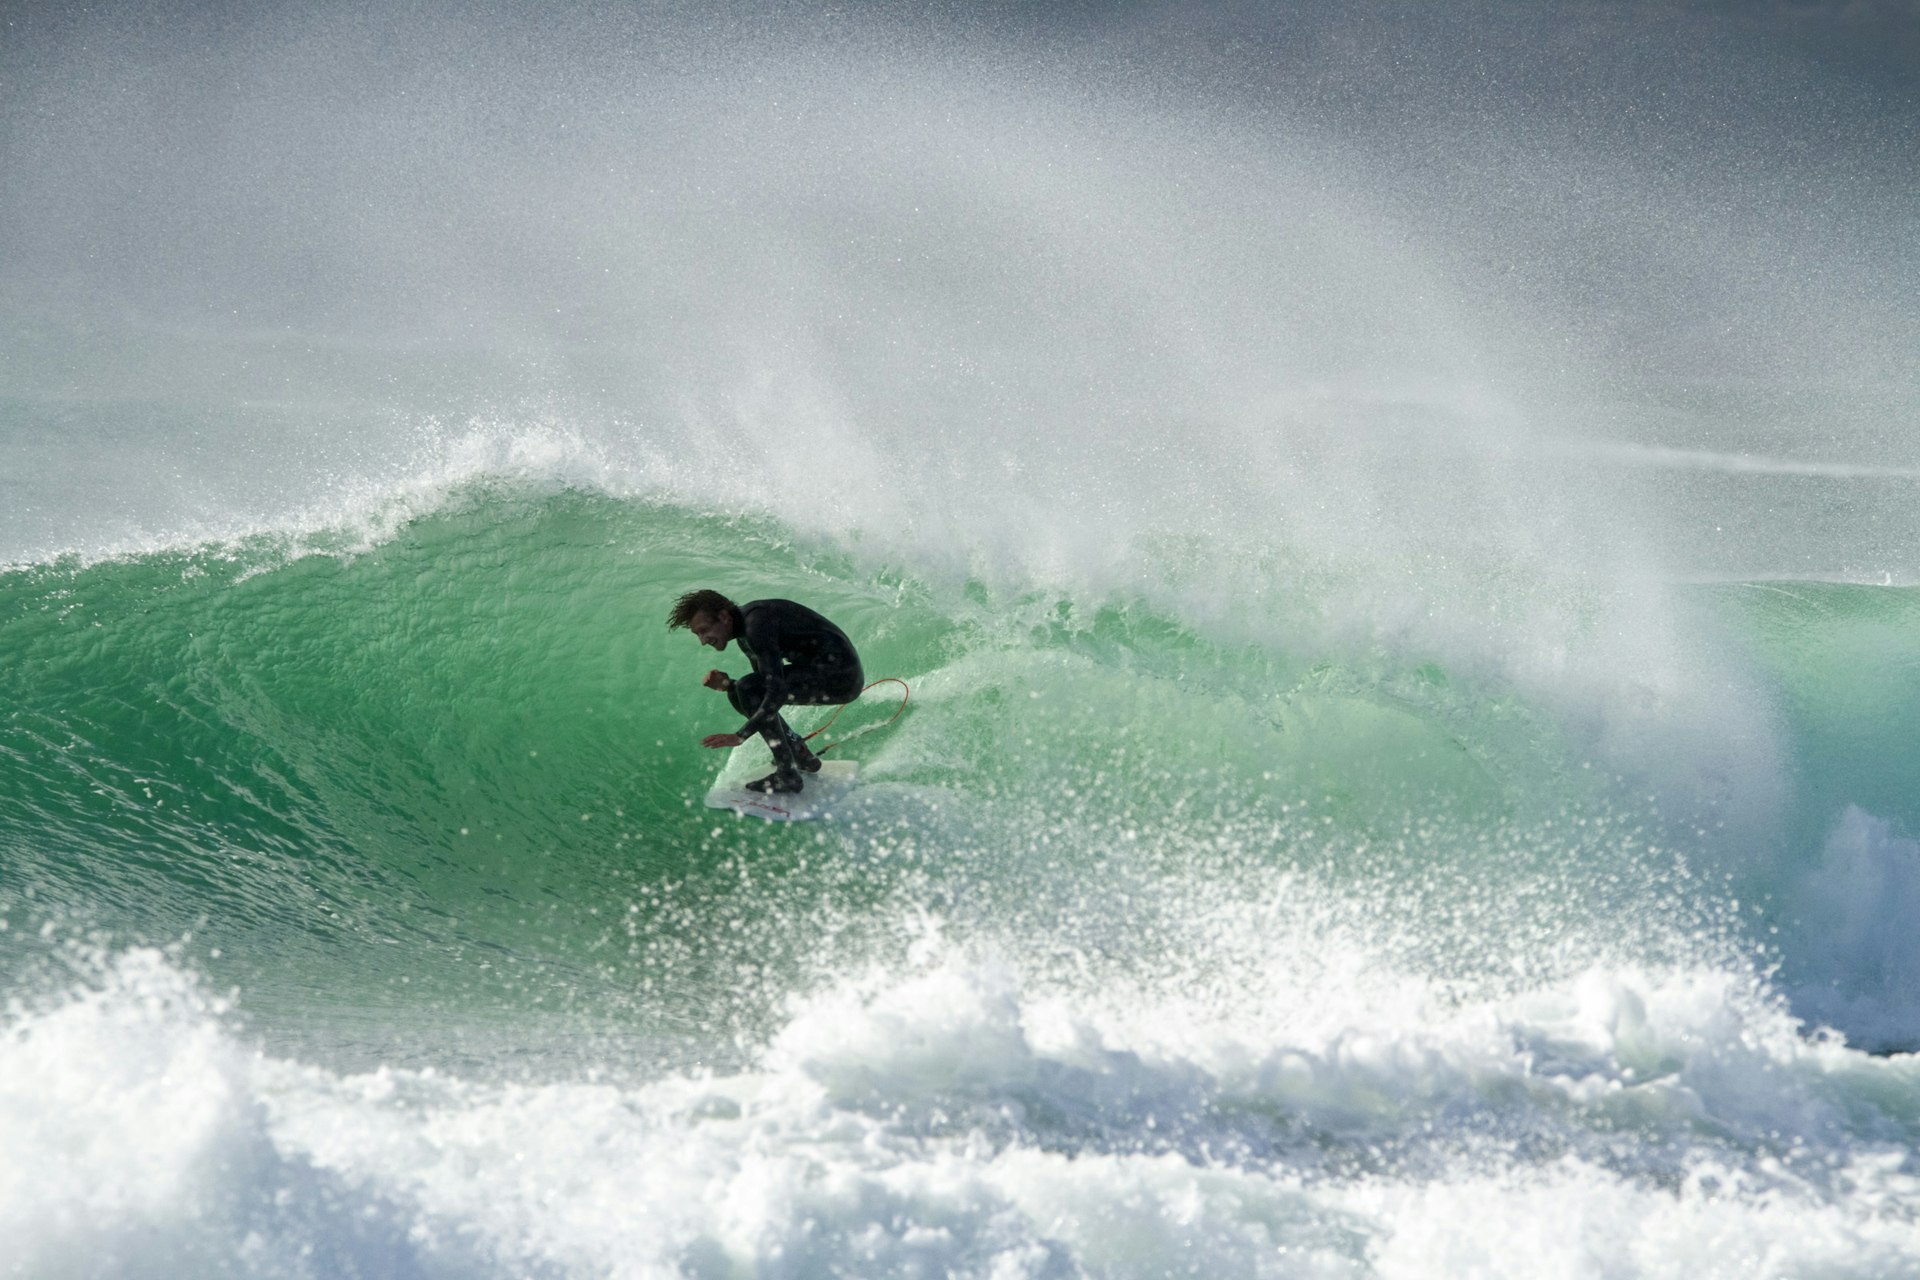 Surfer James Parry on being at one with the water